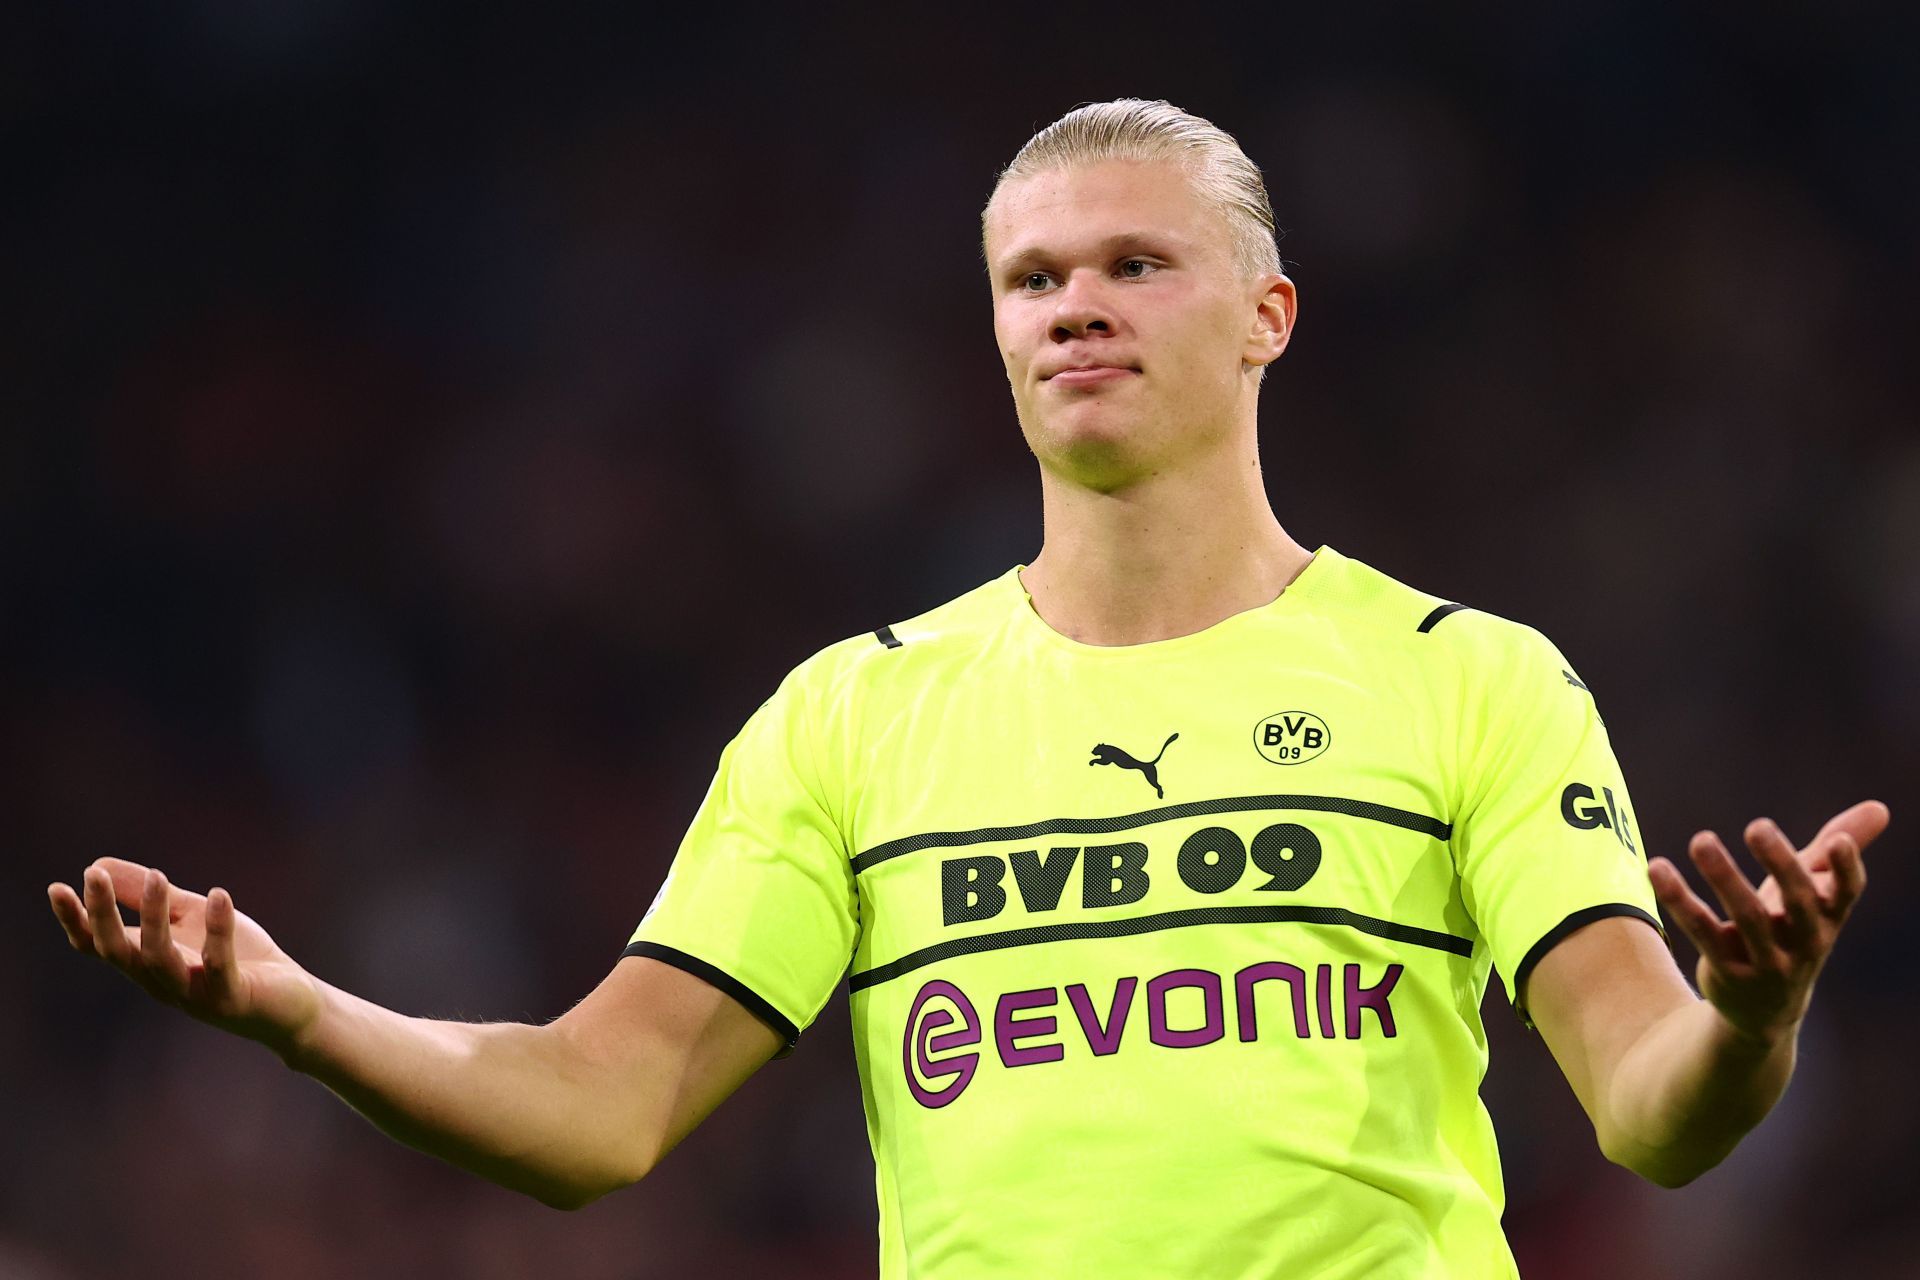 Lothar Matthaus believes Erling Haaland could be a better fit at Real Madrid than at Bayern Munich.